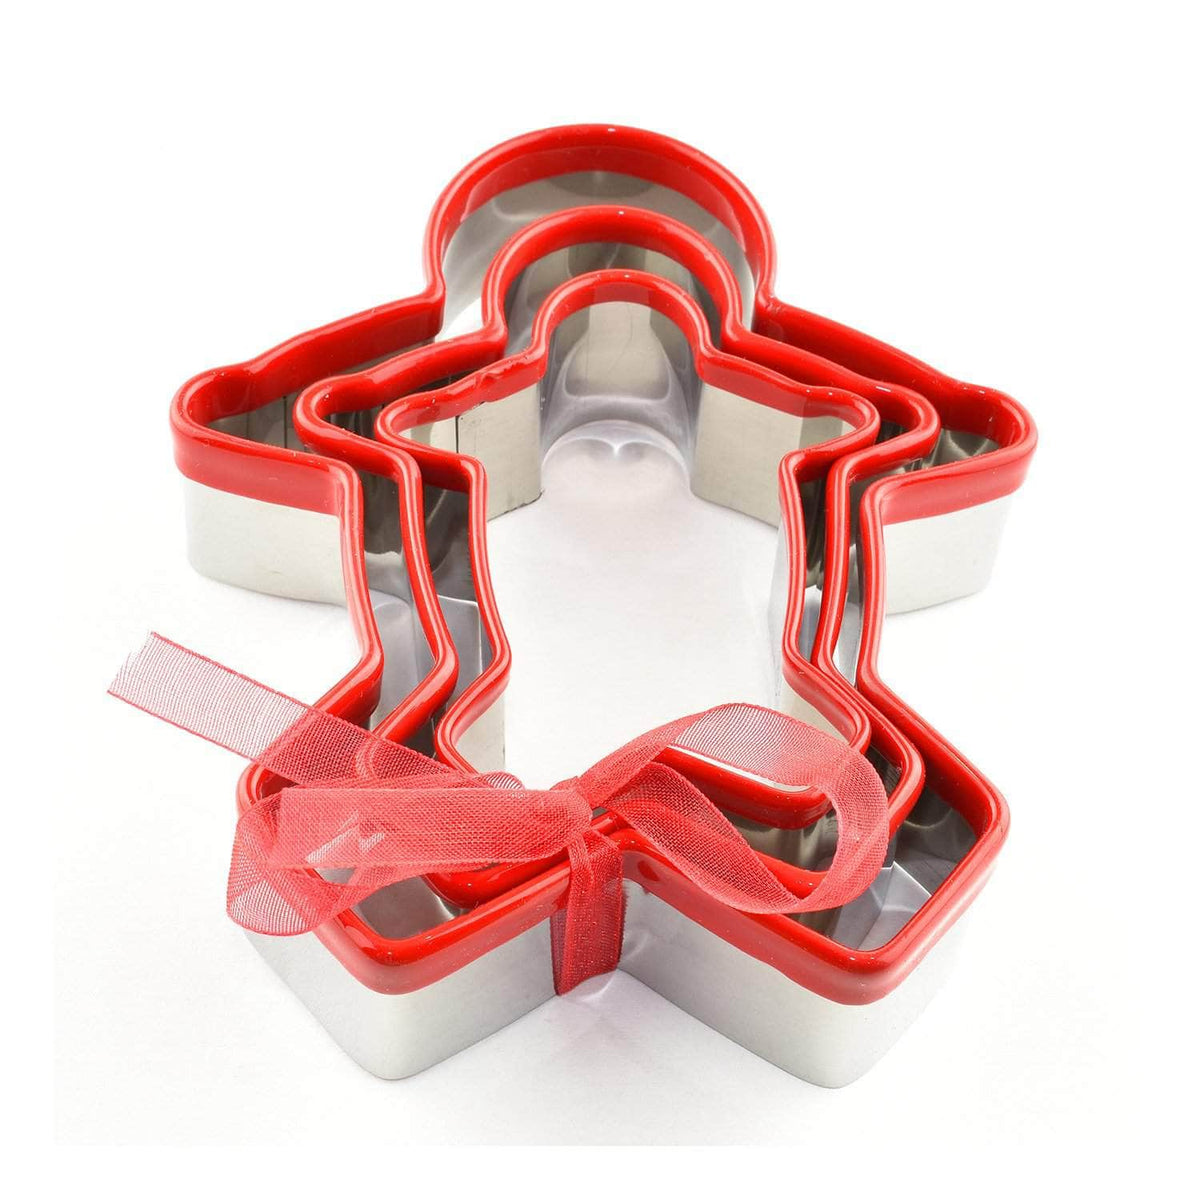 *New* Gingerbread cutters, set of 3